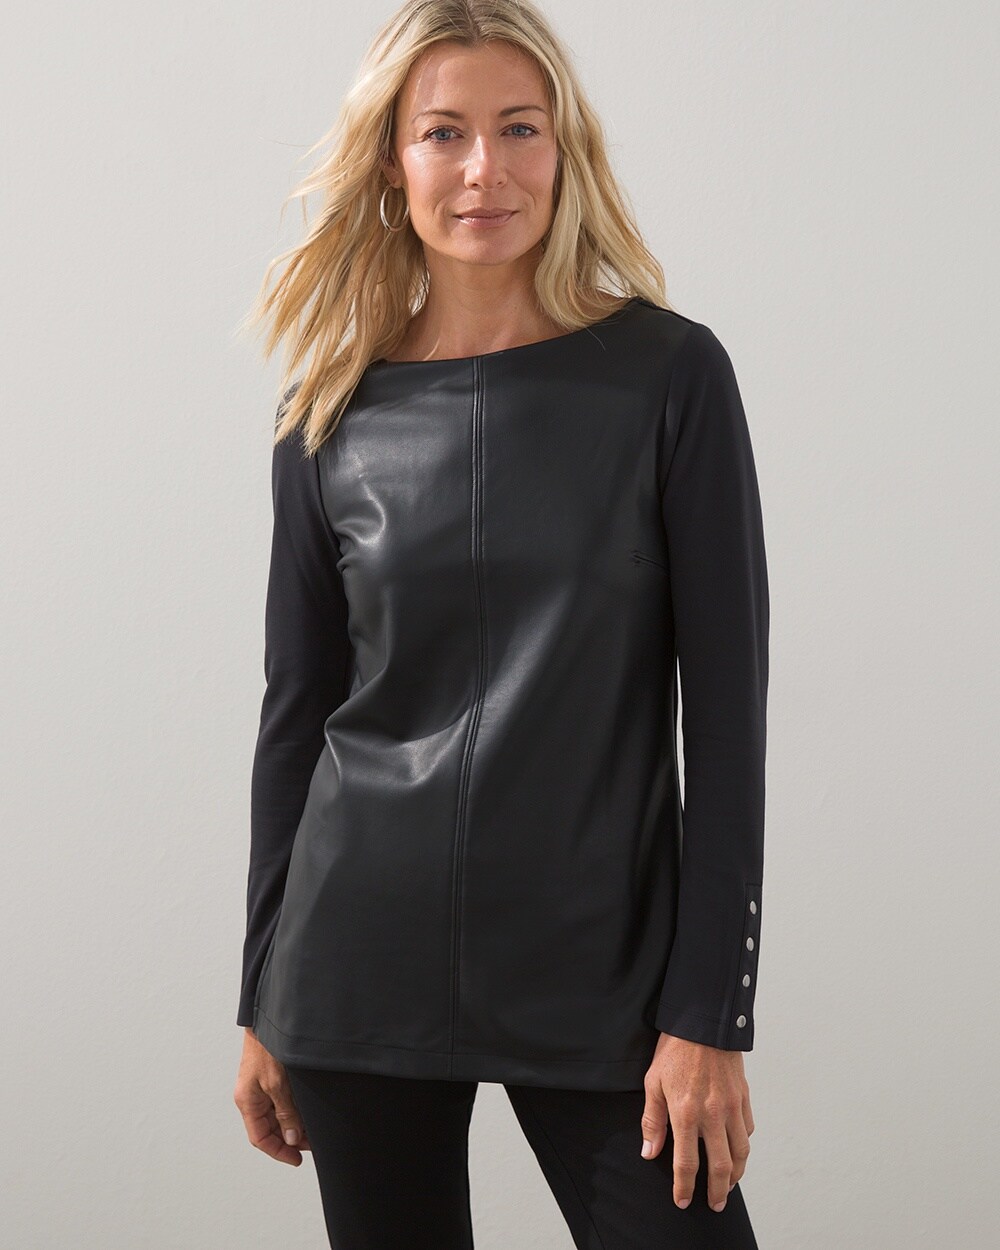 Faux Leather Front Ponte Back Tunic video preview image, click to start video